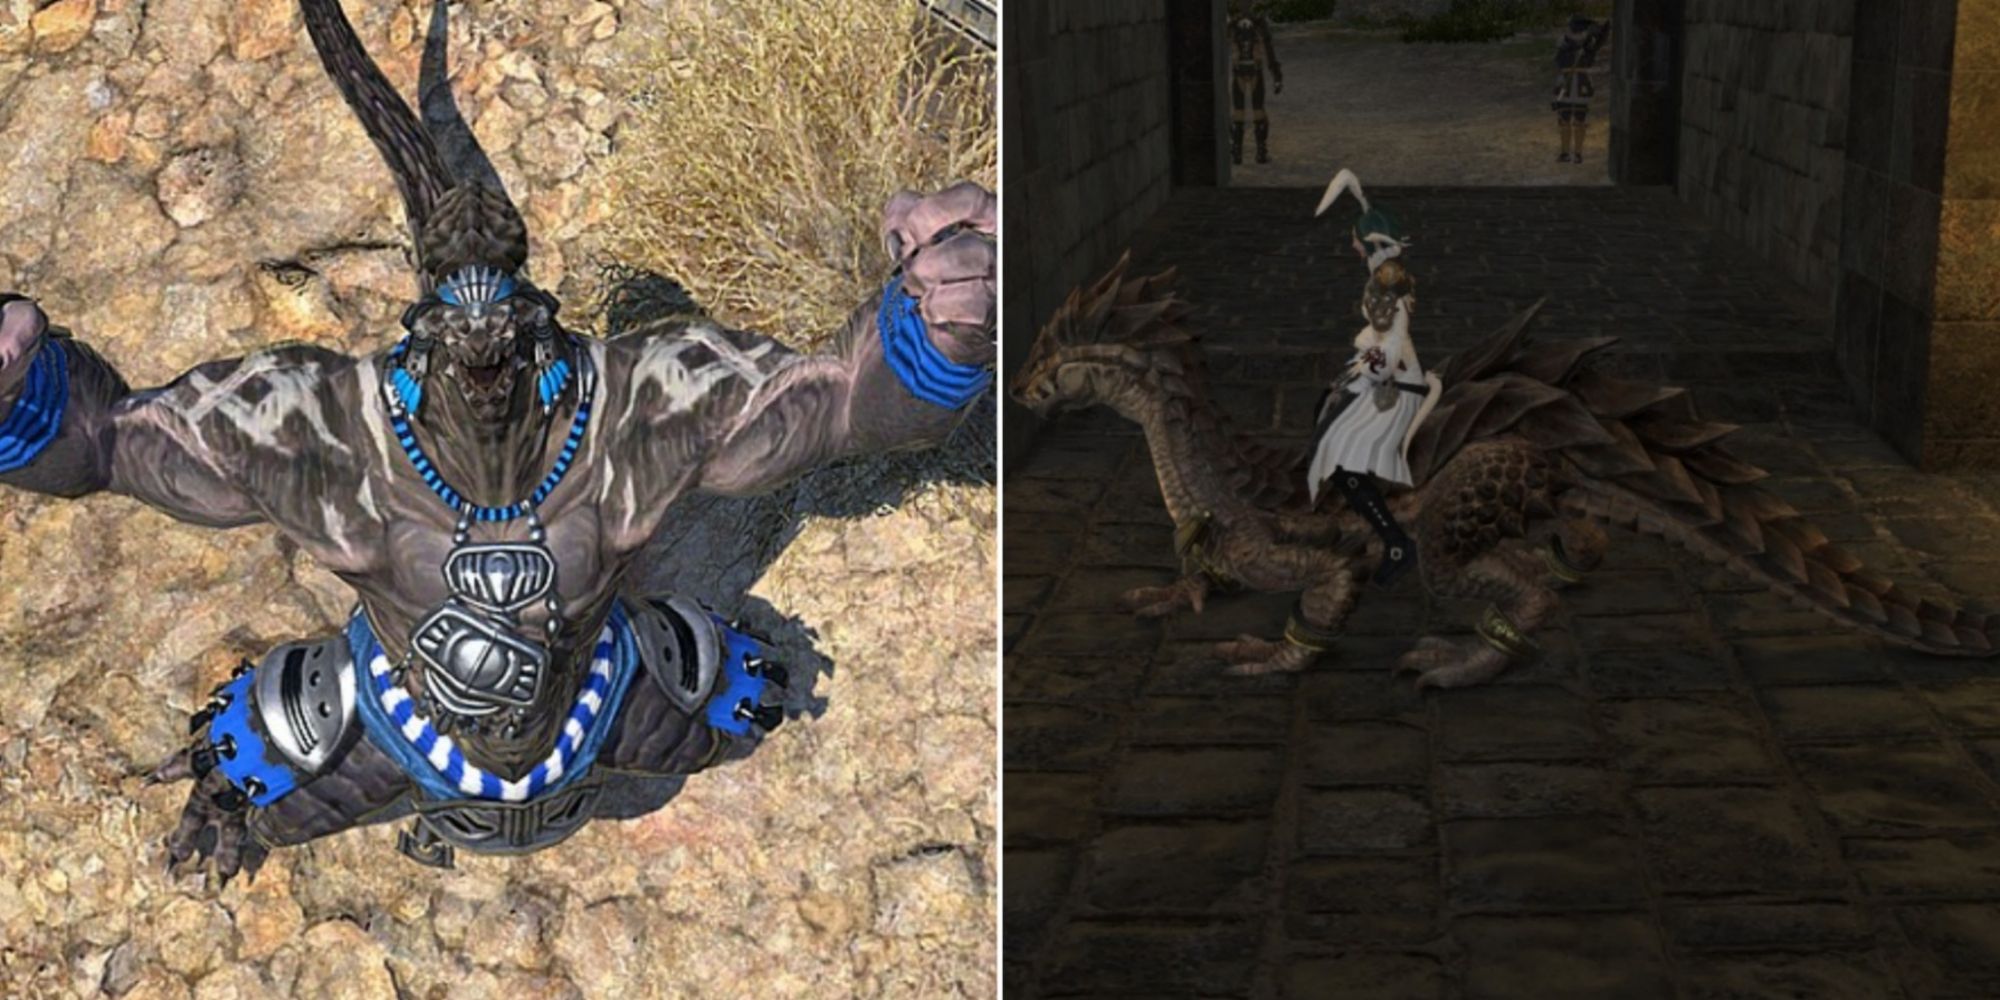 ff14 amaljaa cavalry drake and tribal quest by Mico90 and Izumi from ffxivconsolegameswiki.com